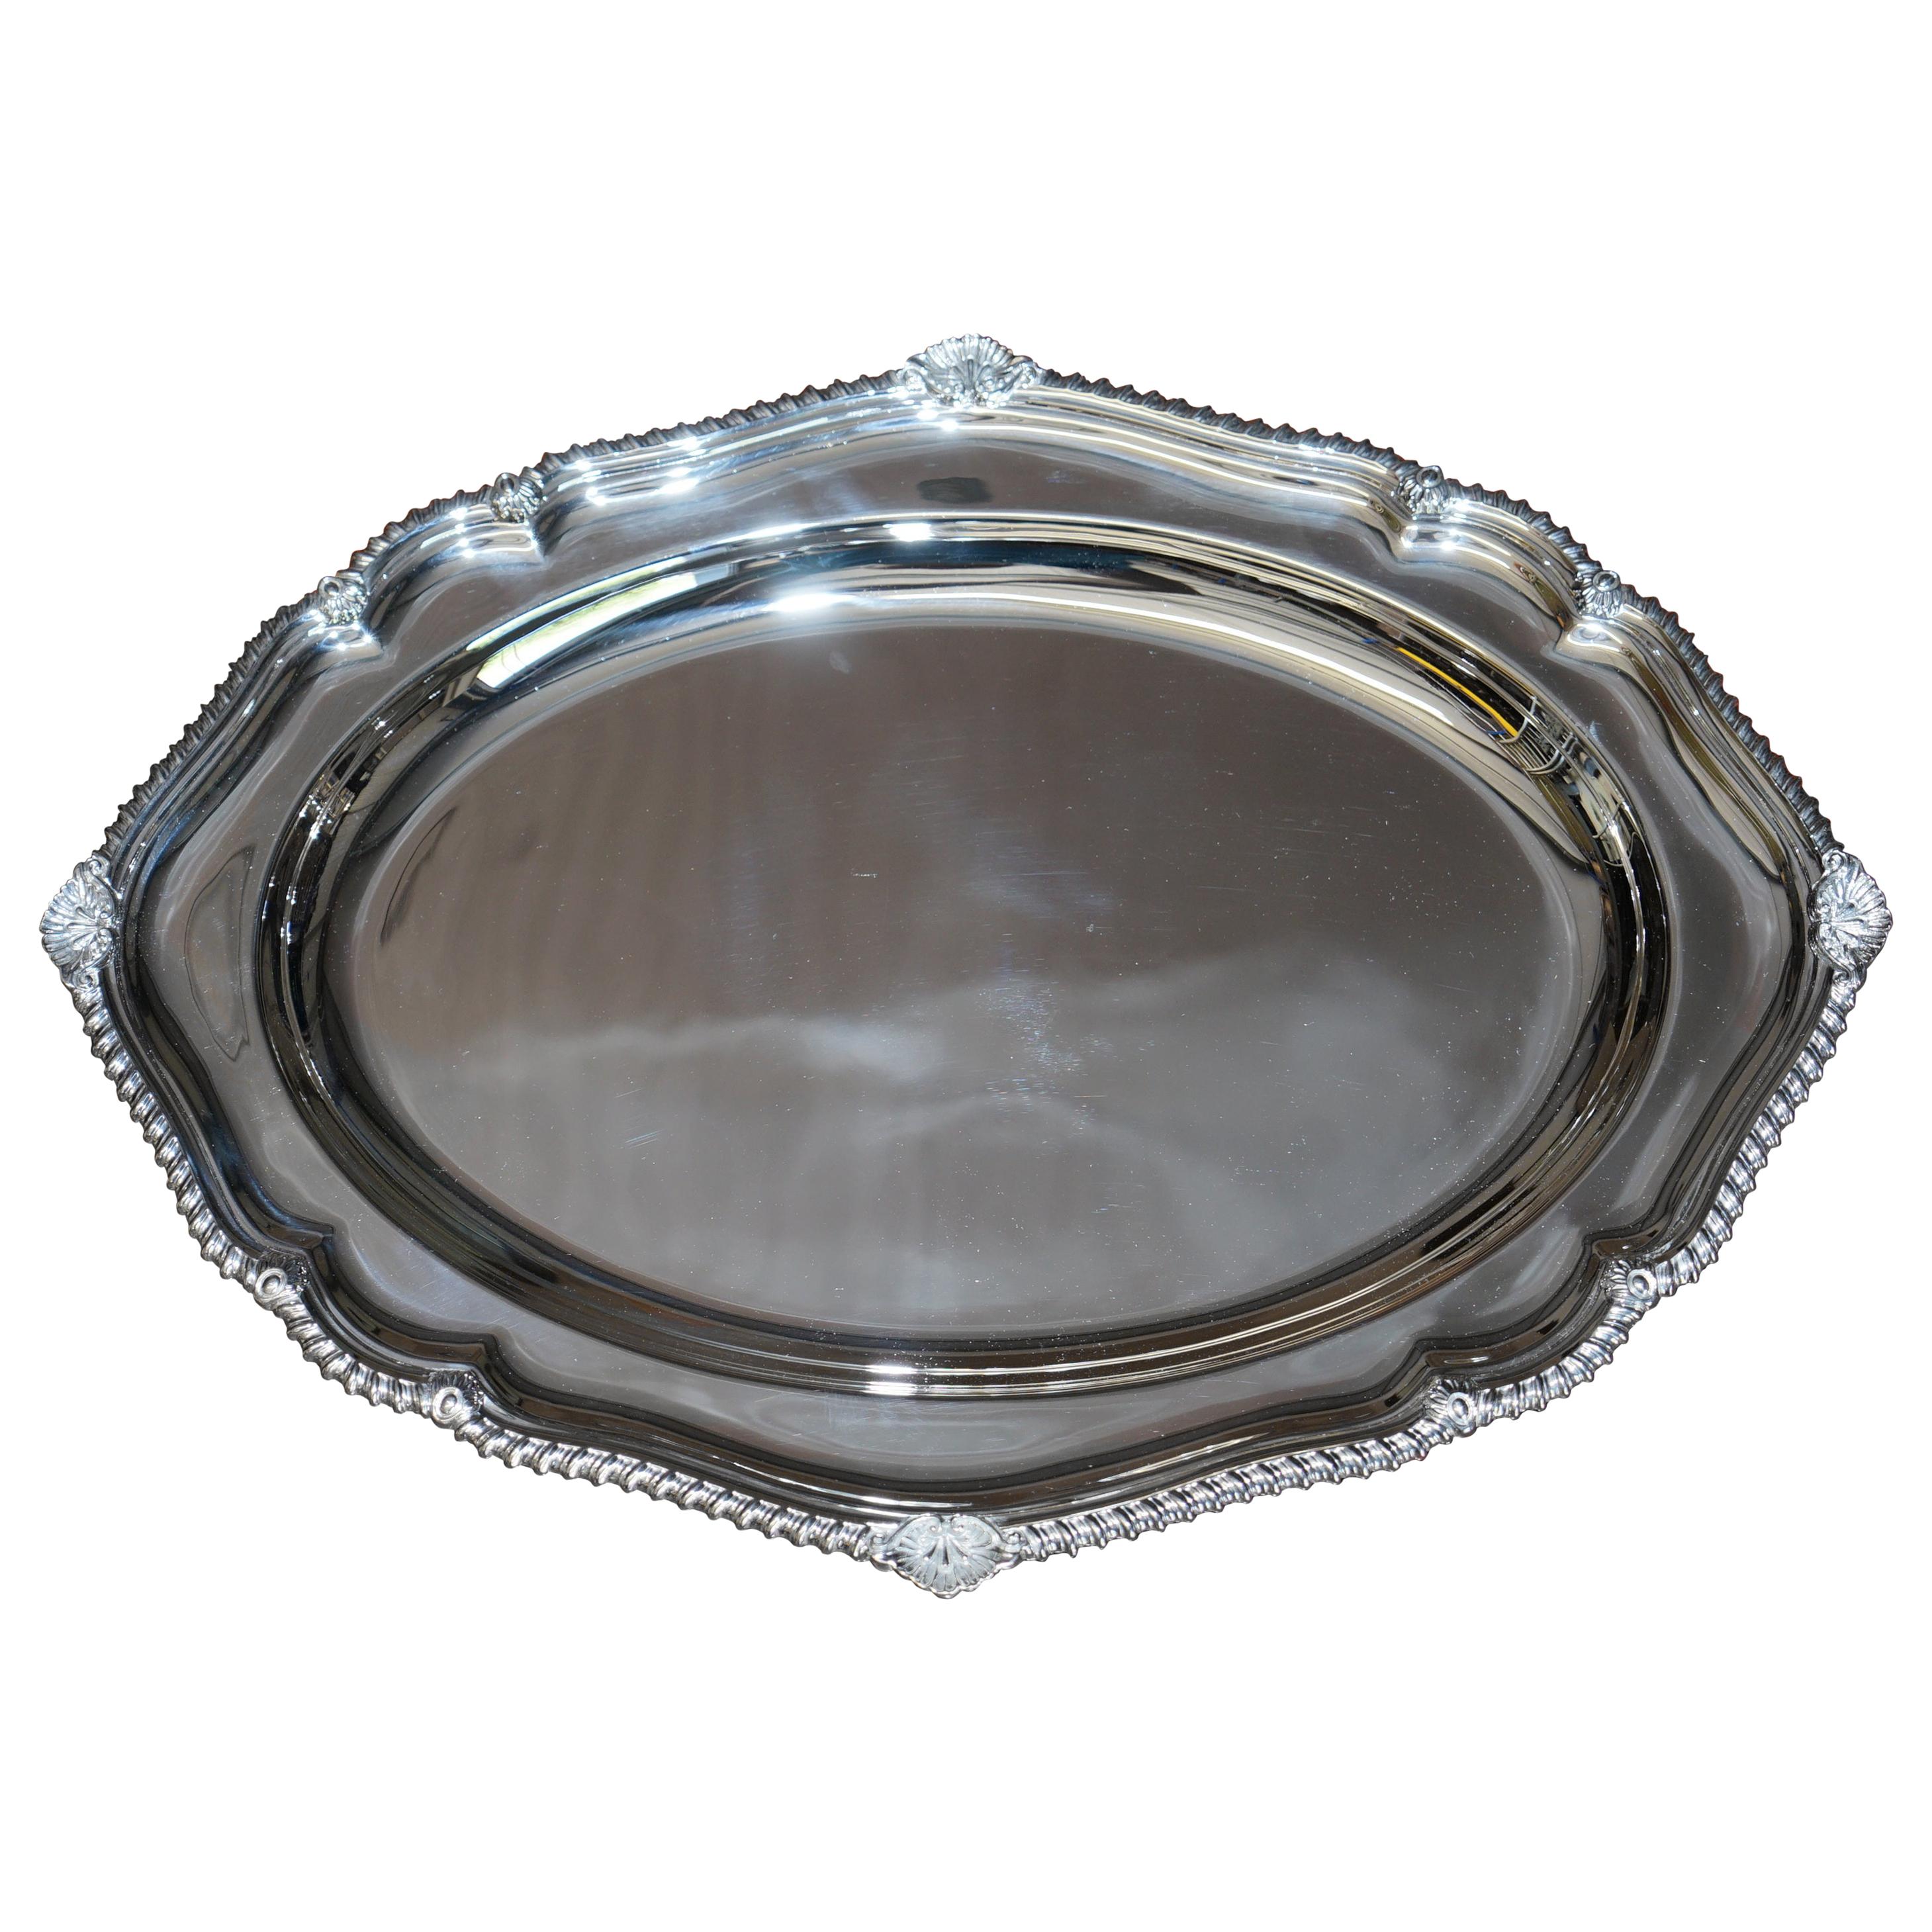 Huge 1971 Fully Restored Thick 2.3kgs Asprey London Sterling Silver Platter Tray For Sale